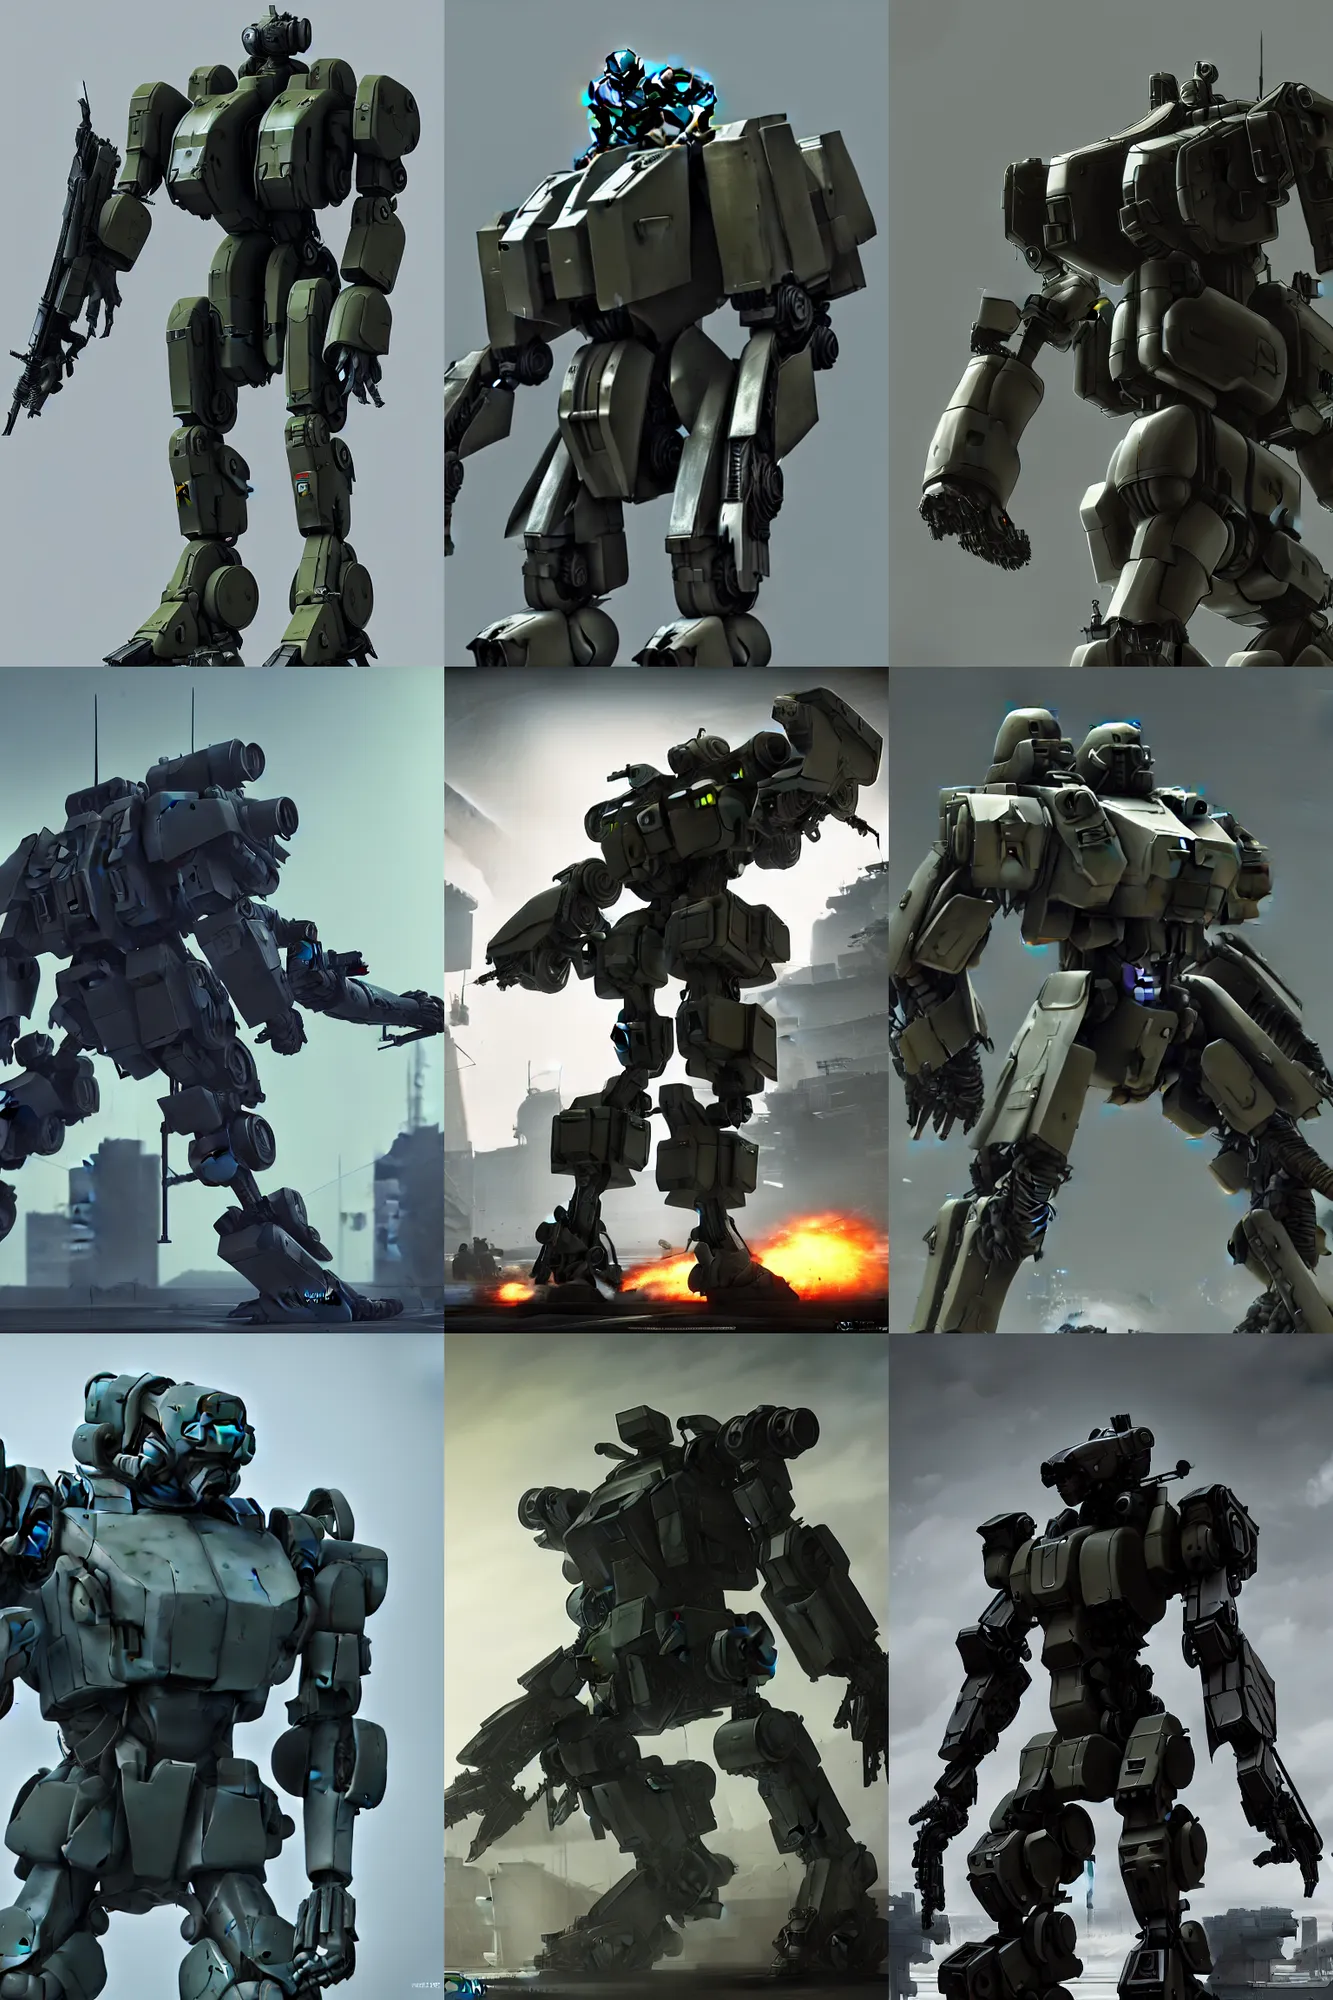 combat mech from Metal Gear, highly detailed, | Stable Diffusion